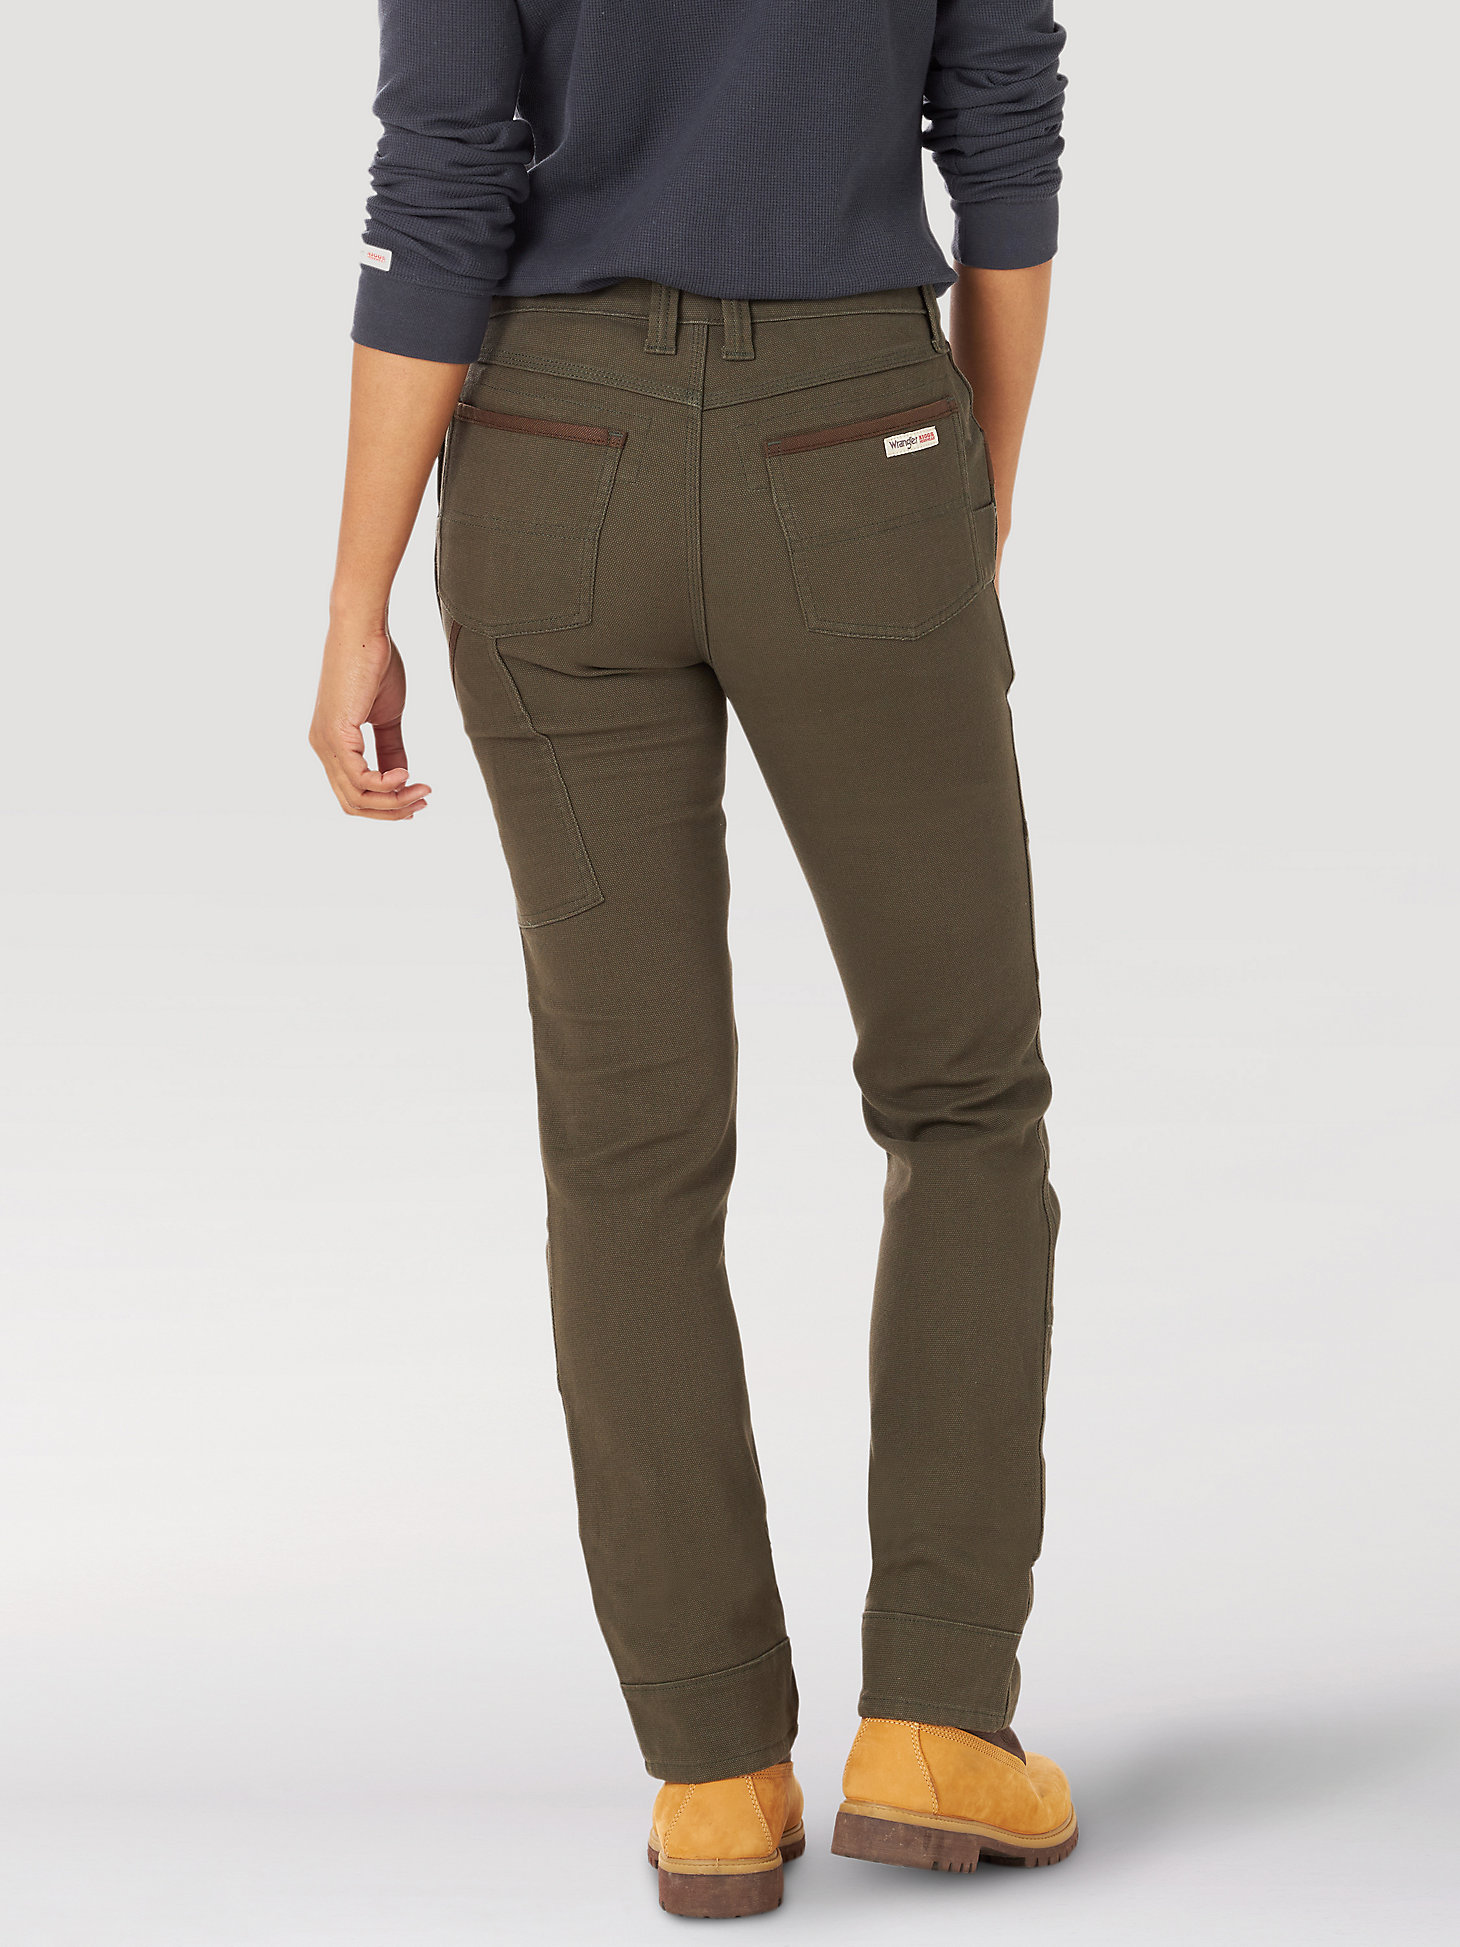 Women's Wrangler® RIGGS Workwear® Straight Fit Utility Work Pant in Loden alternative view 3